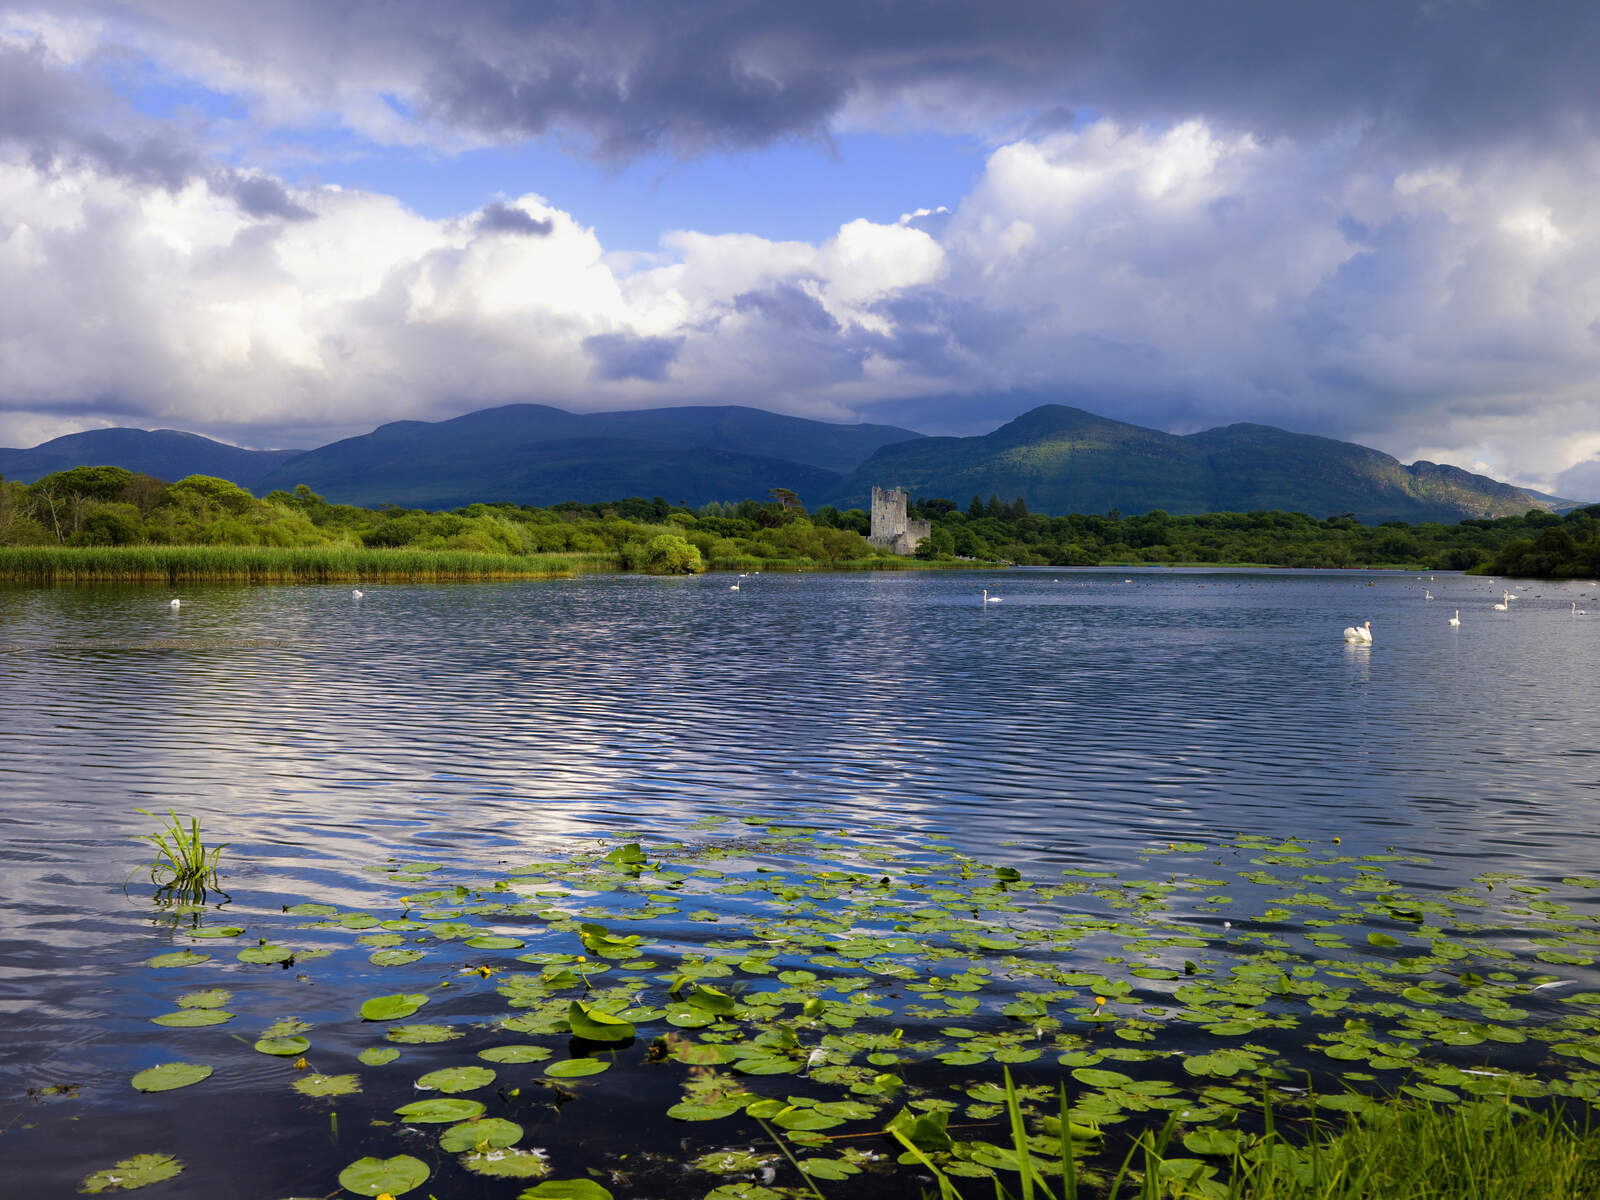 Visit Ross Castle, one of the top things to do in Killarney, Ireland and a major tourist attraction.